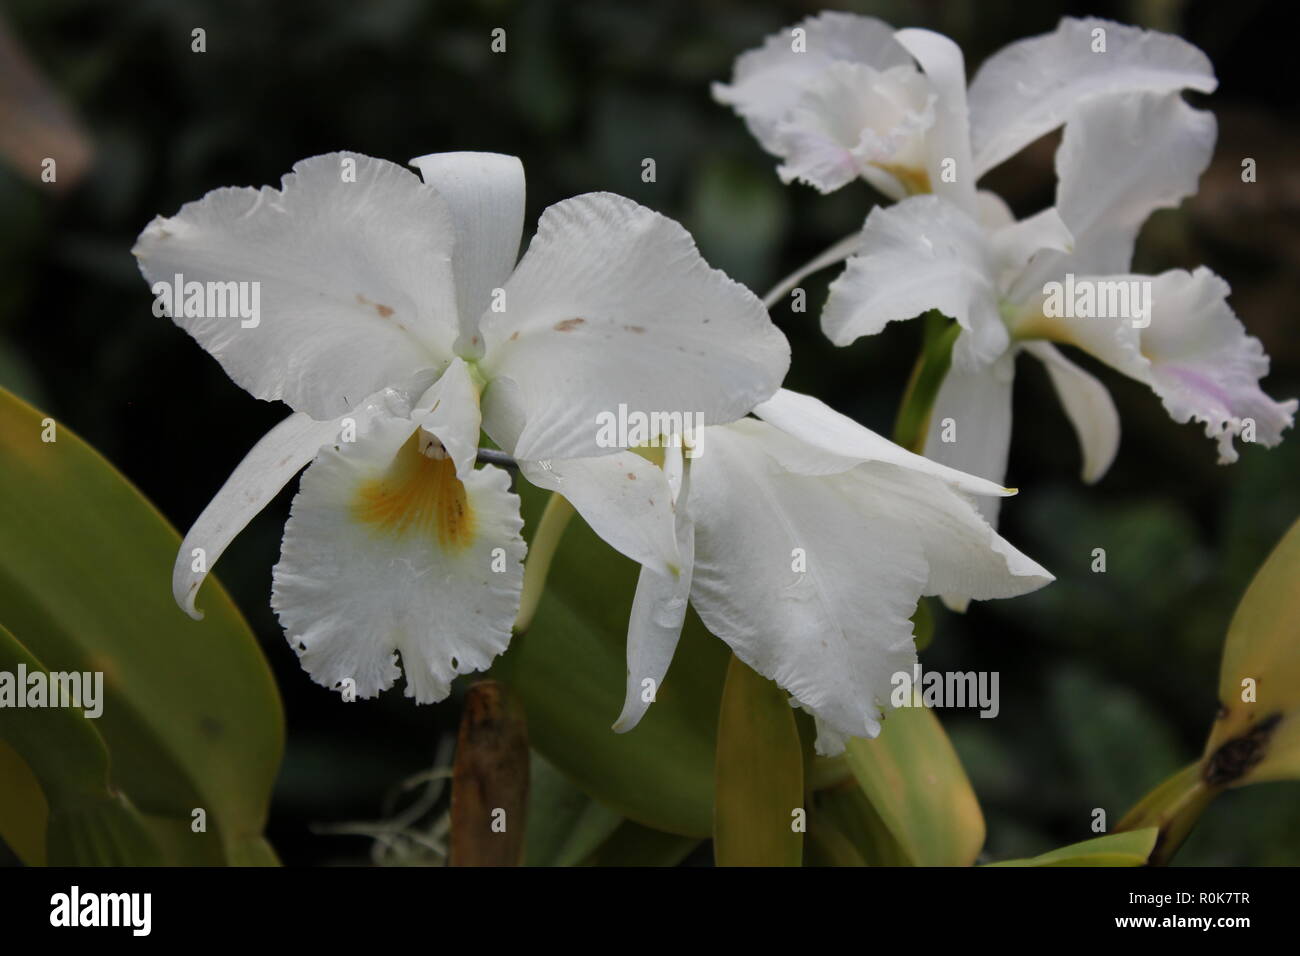 Flawless, beautiful, stunning cultivated Cattleya orchid flowering plant growing in the flower garden. Stock Photo